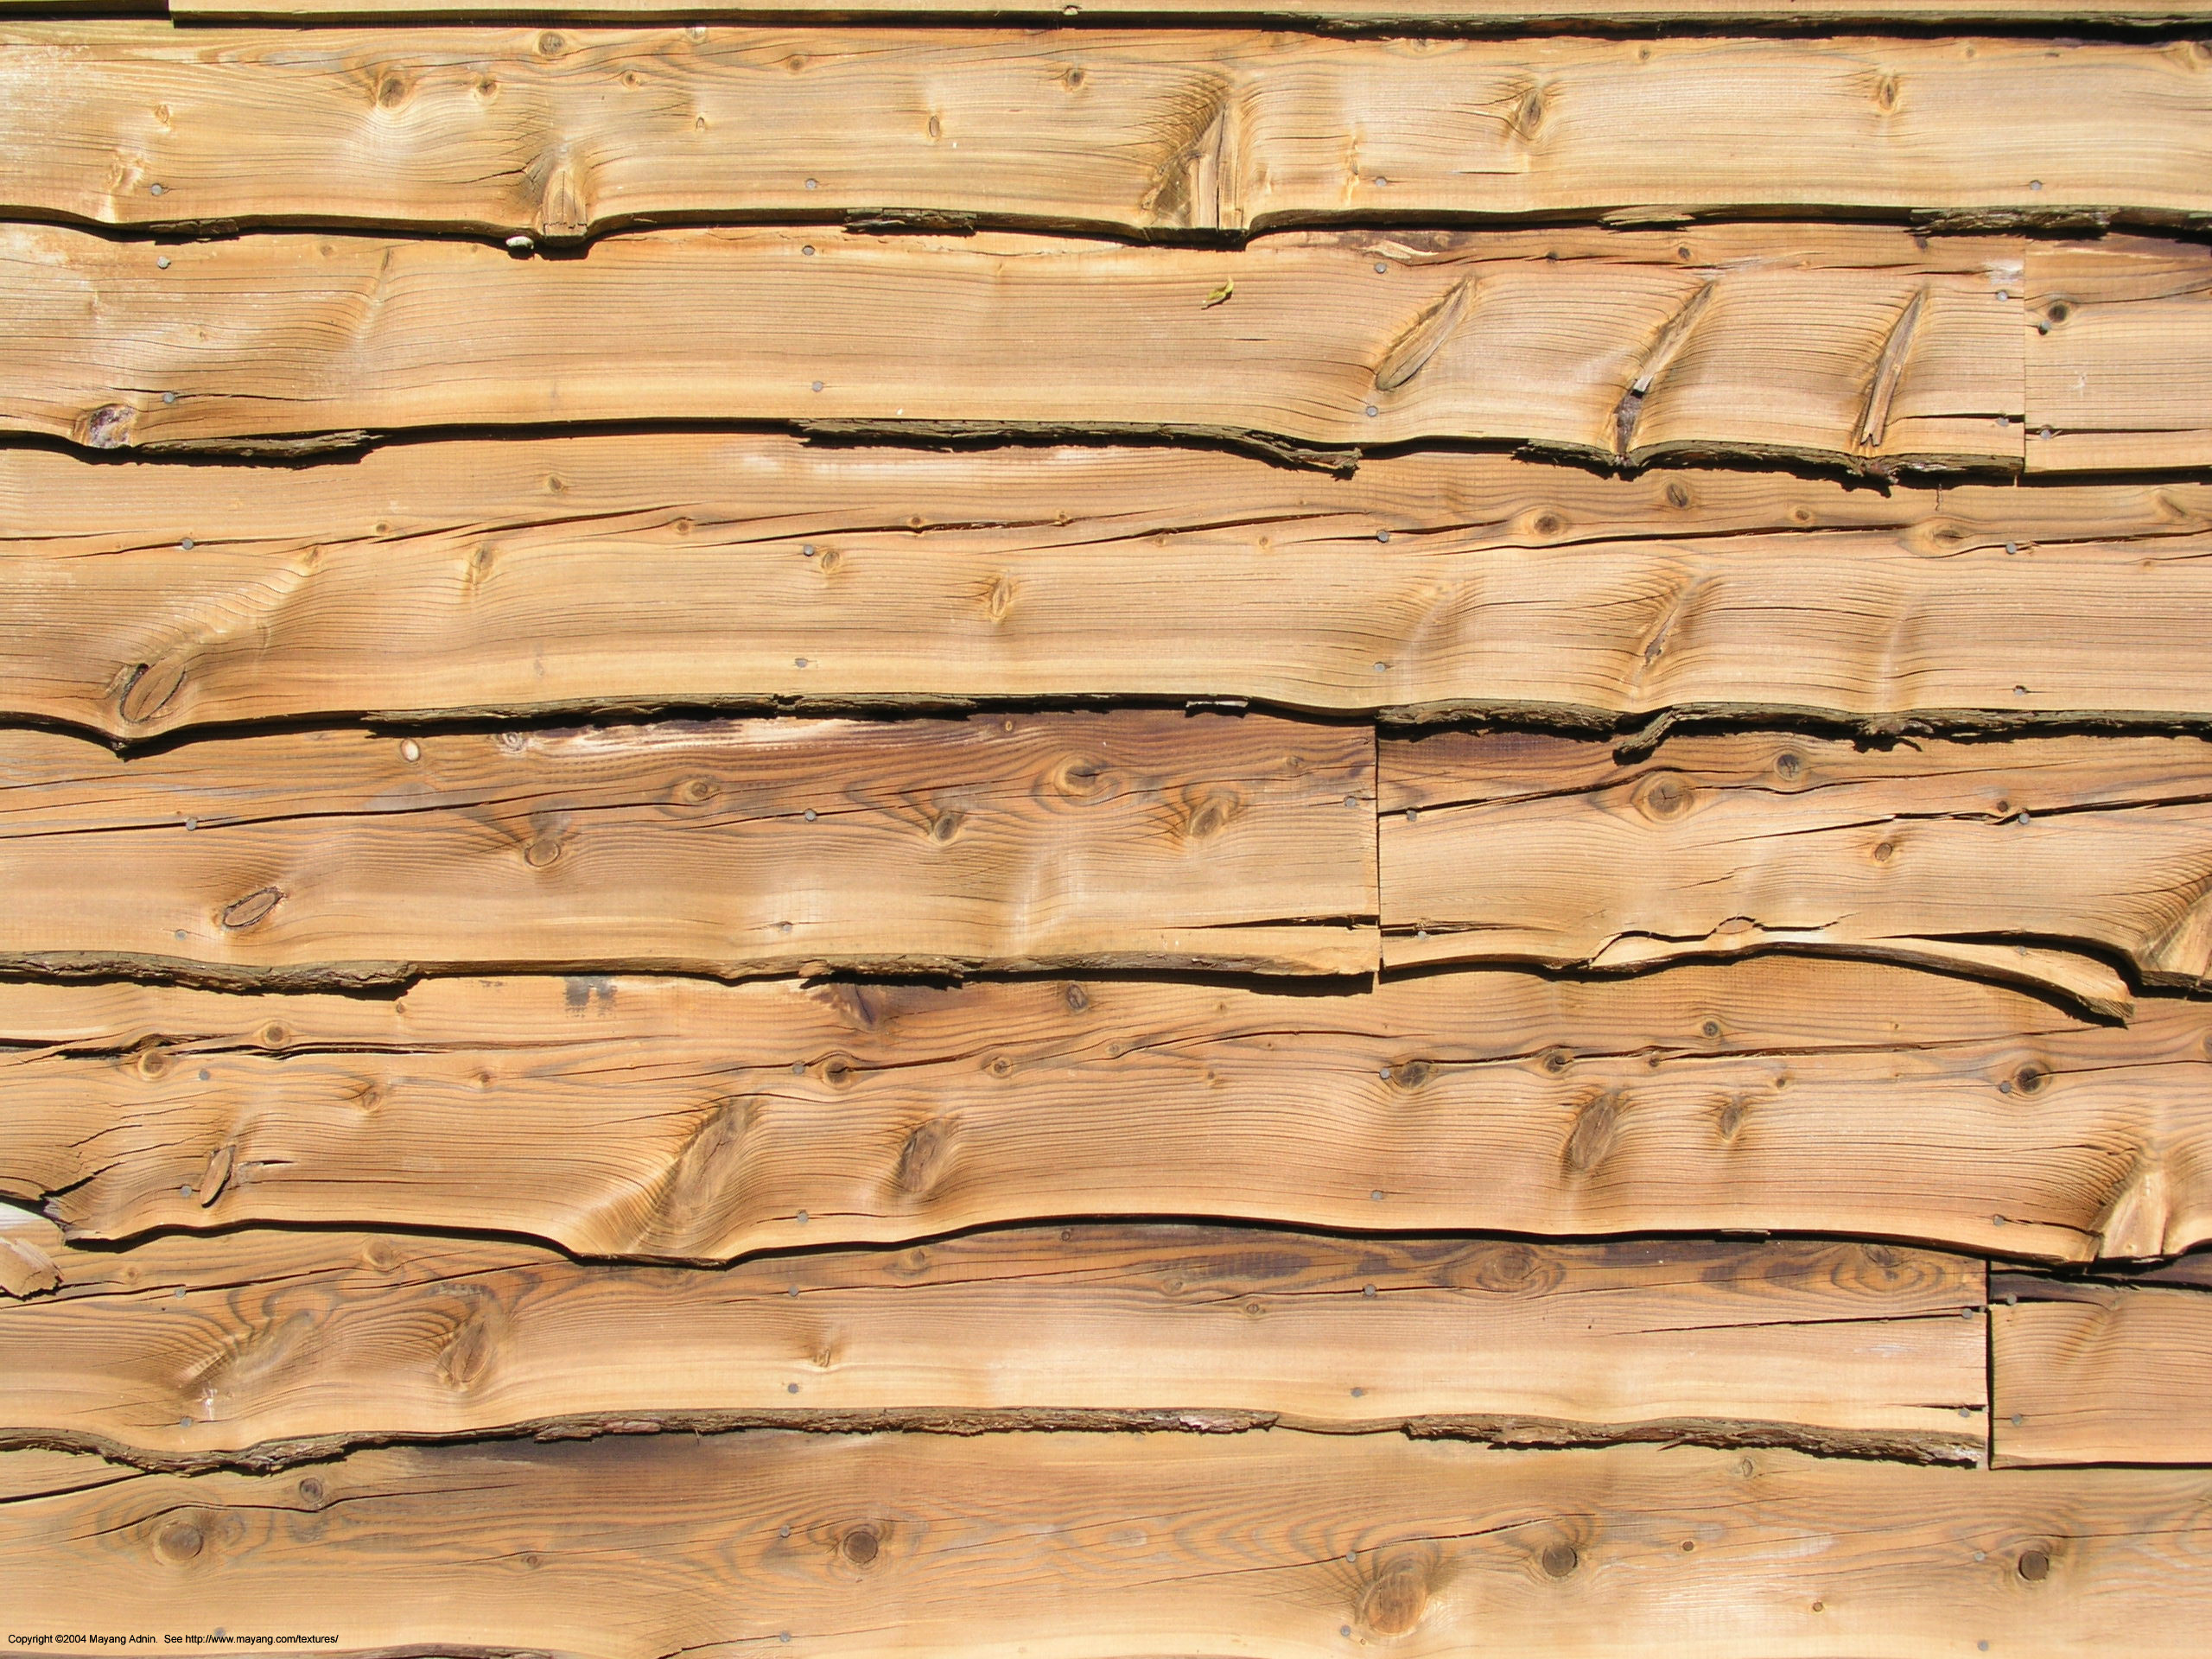 2560x1920 Extremely Rough Wood Plank Texture. DOWNLOAD